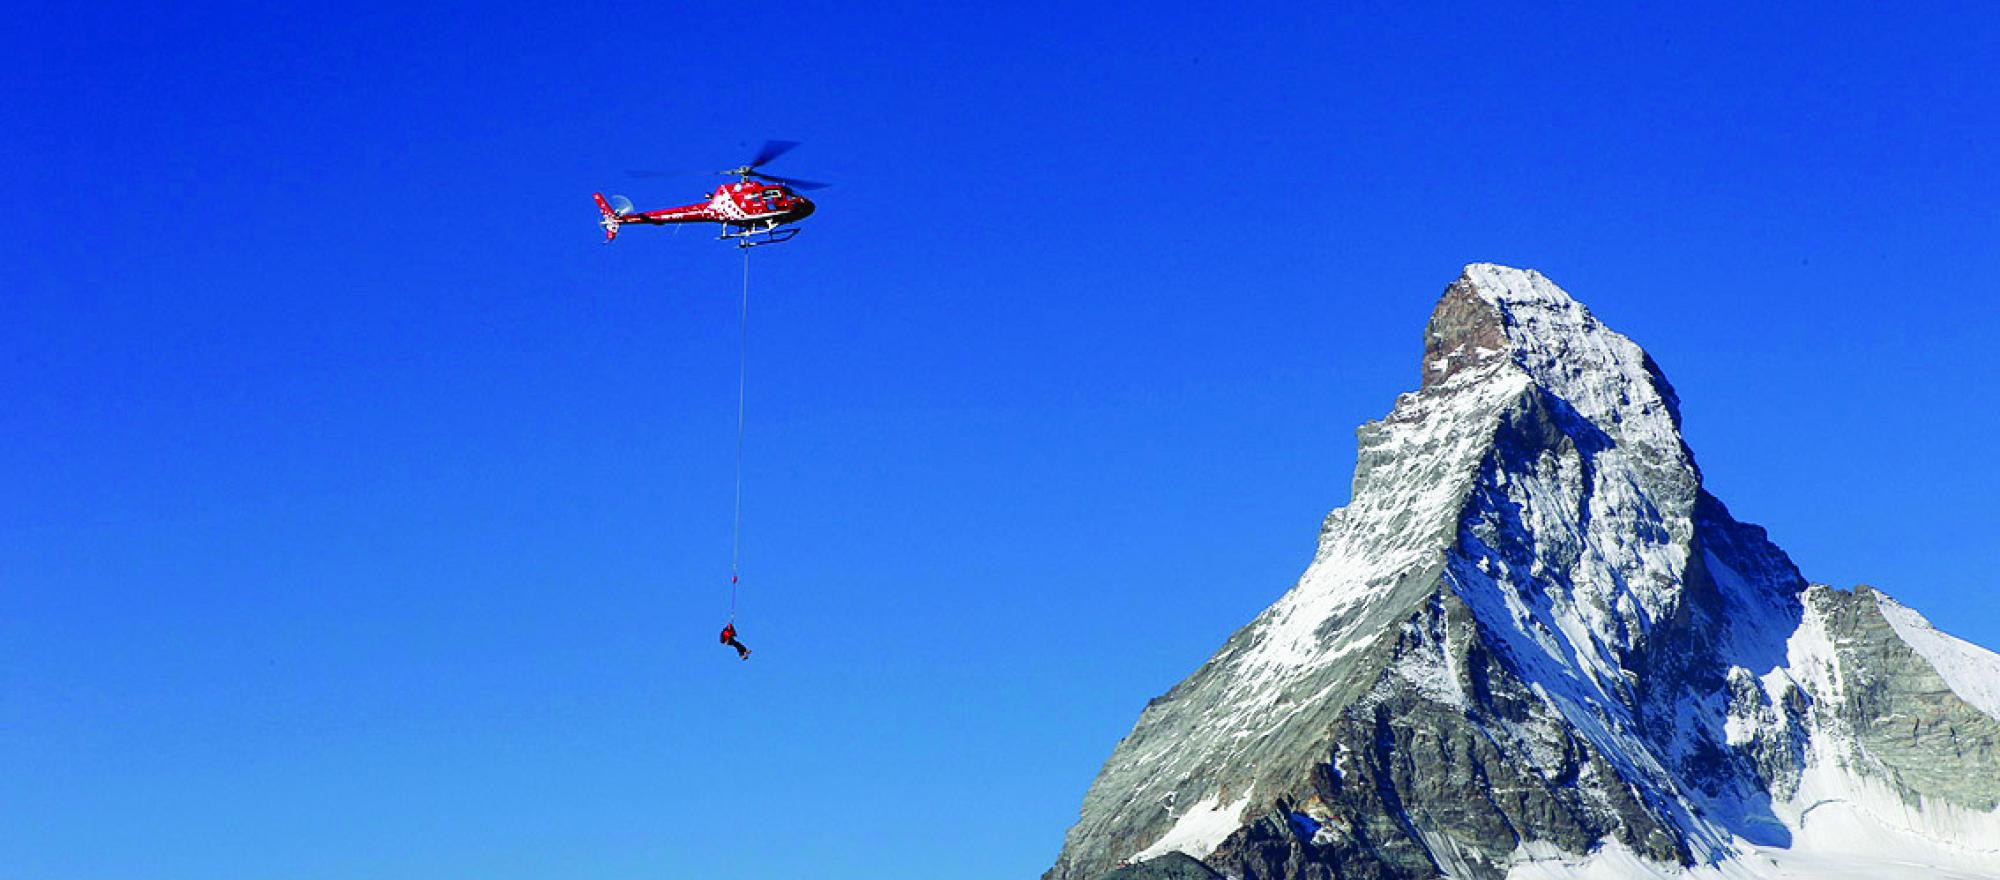 Helicopters have been assisting in rescue efforts in the aftermath of Nepal's earthquake.